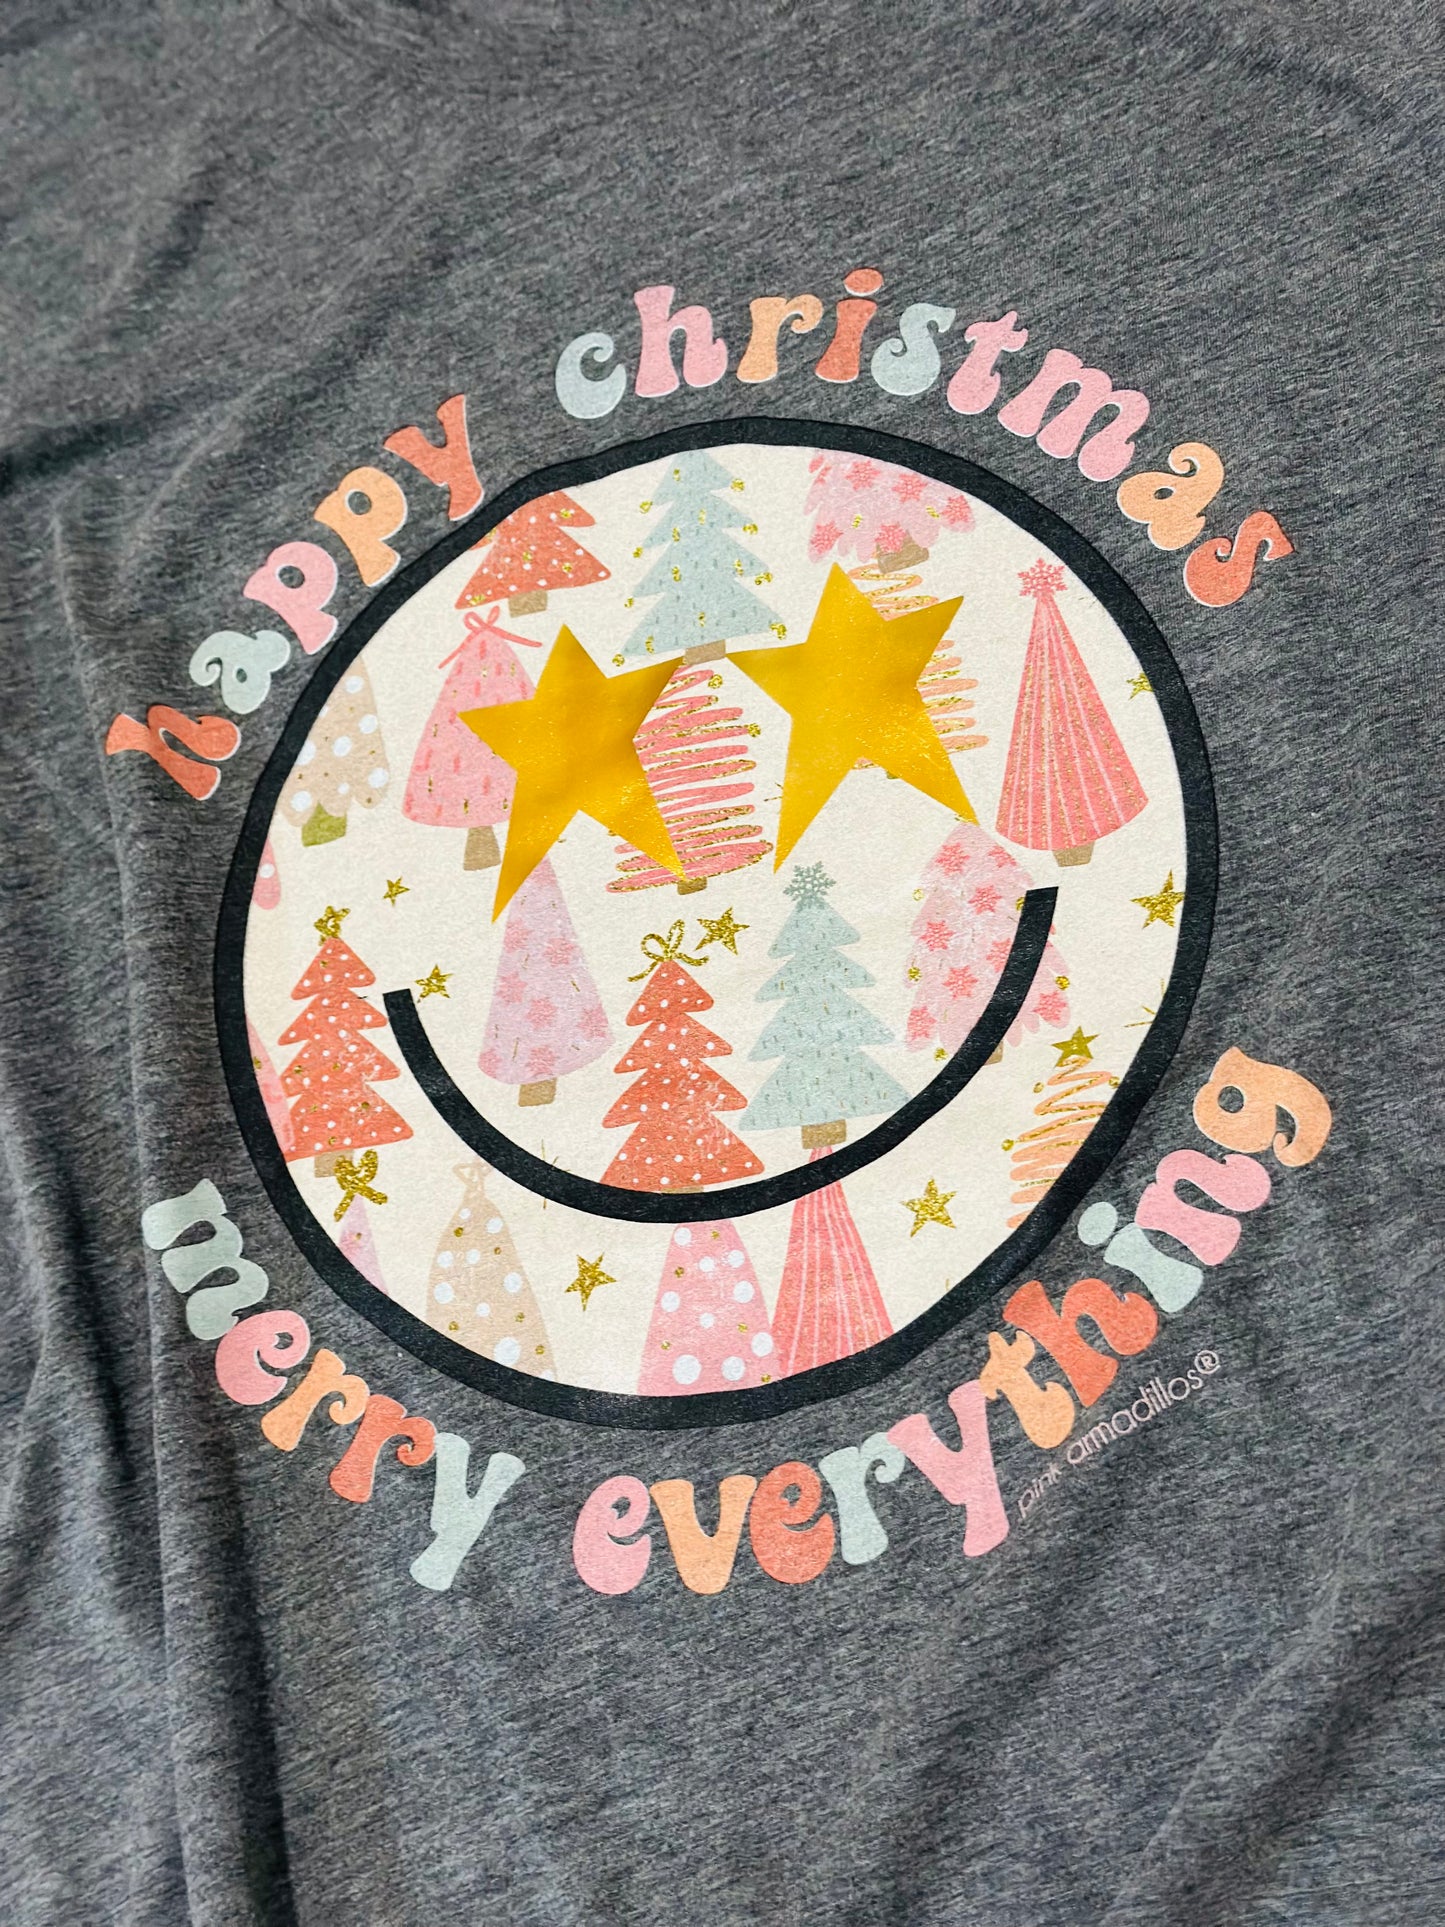 The Merry Everything Tee